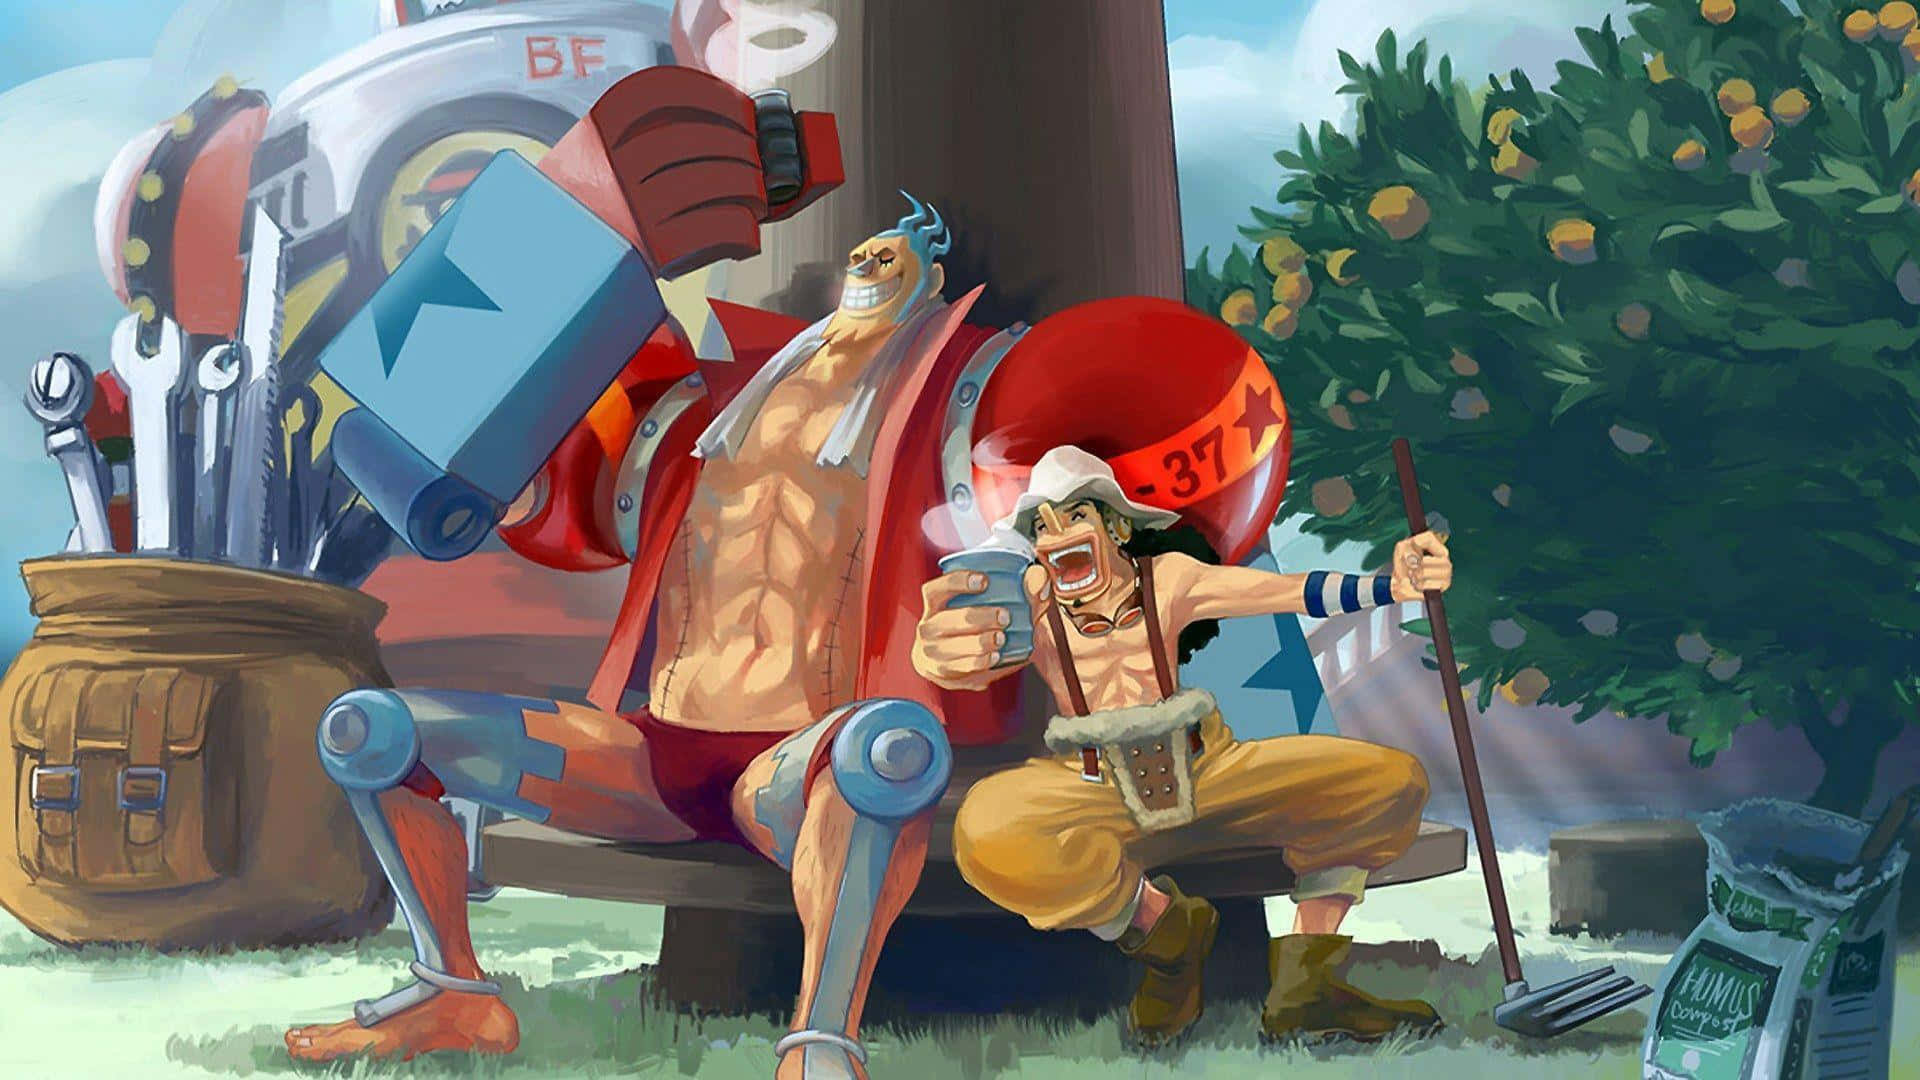 All Aboard the S.S. Franky Wallpaper